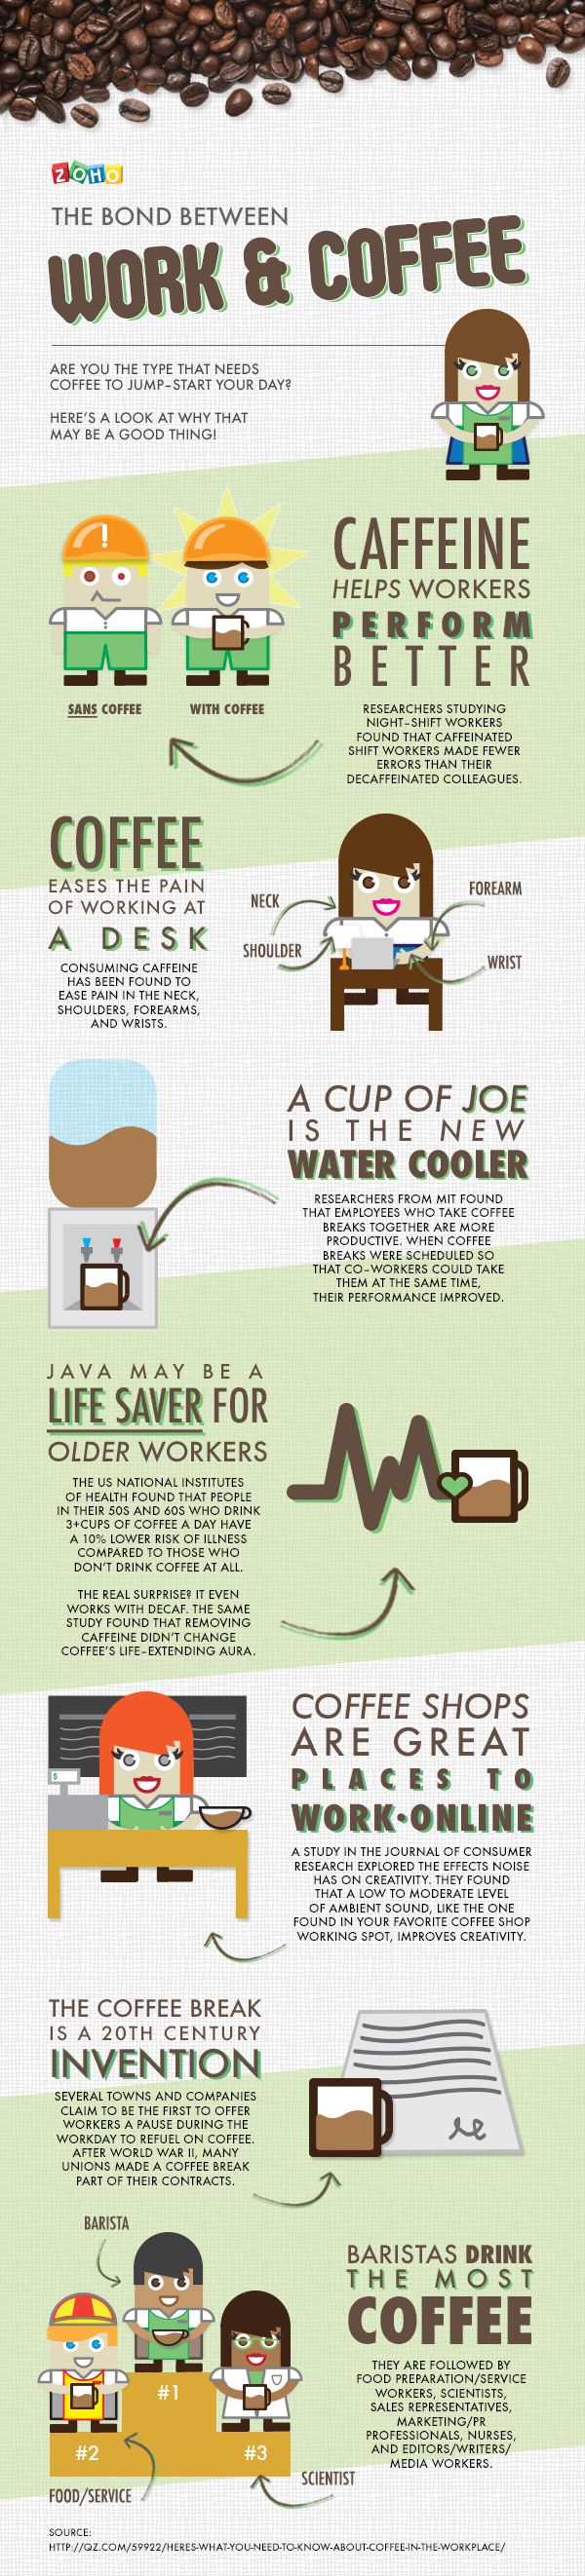 Work and Coffee Infographic